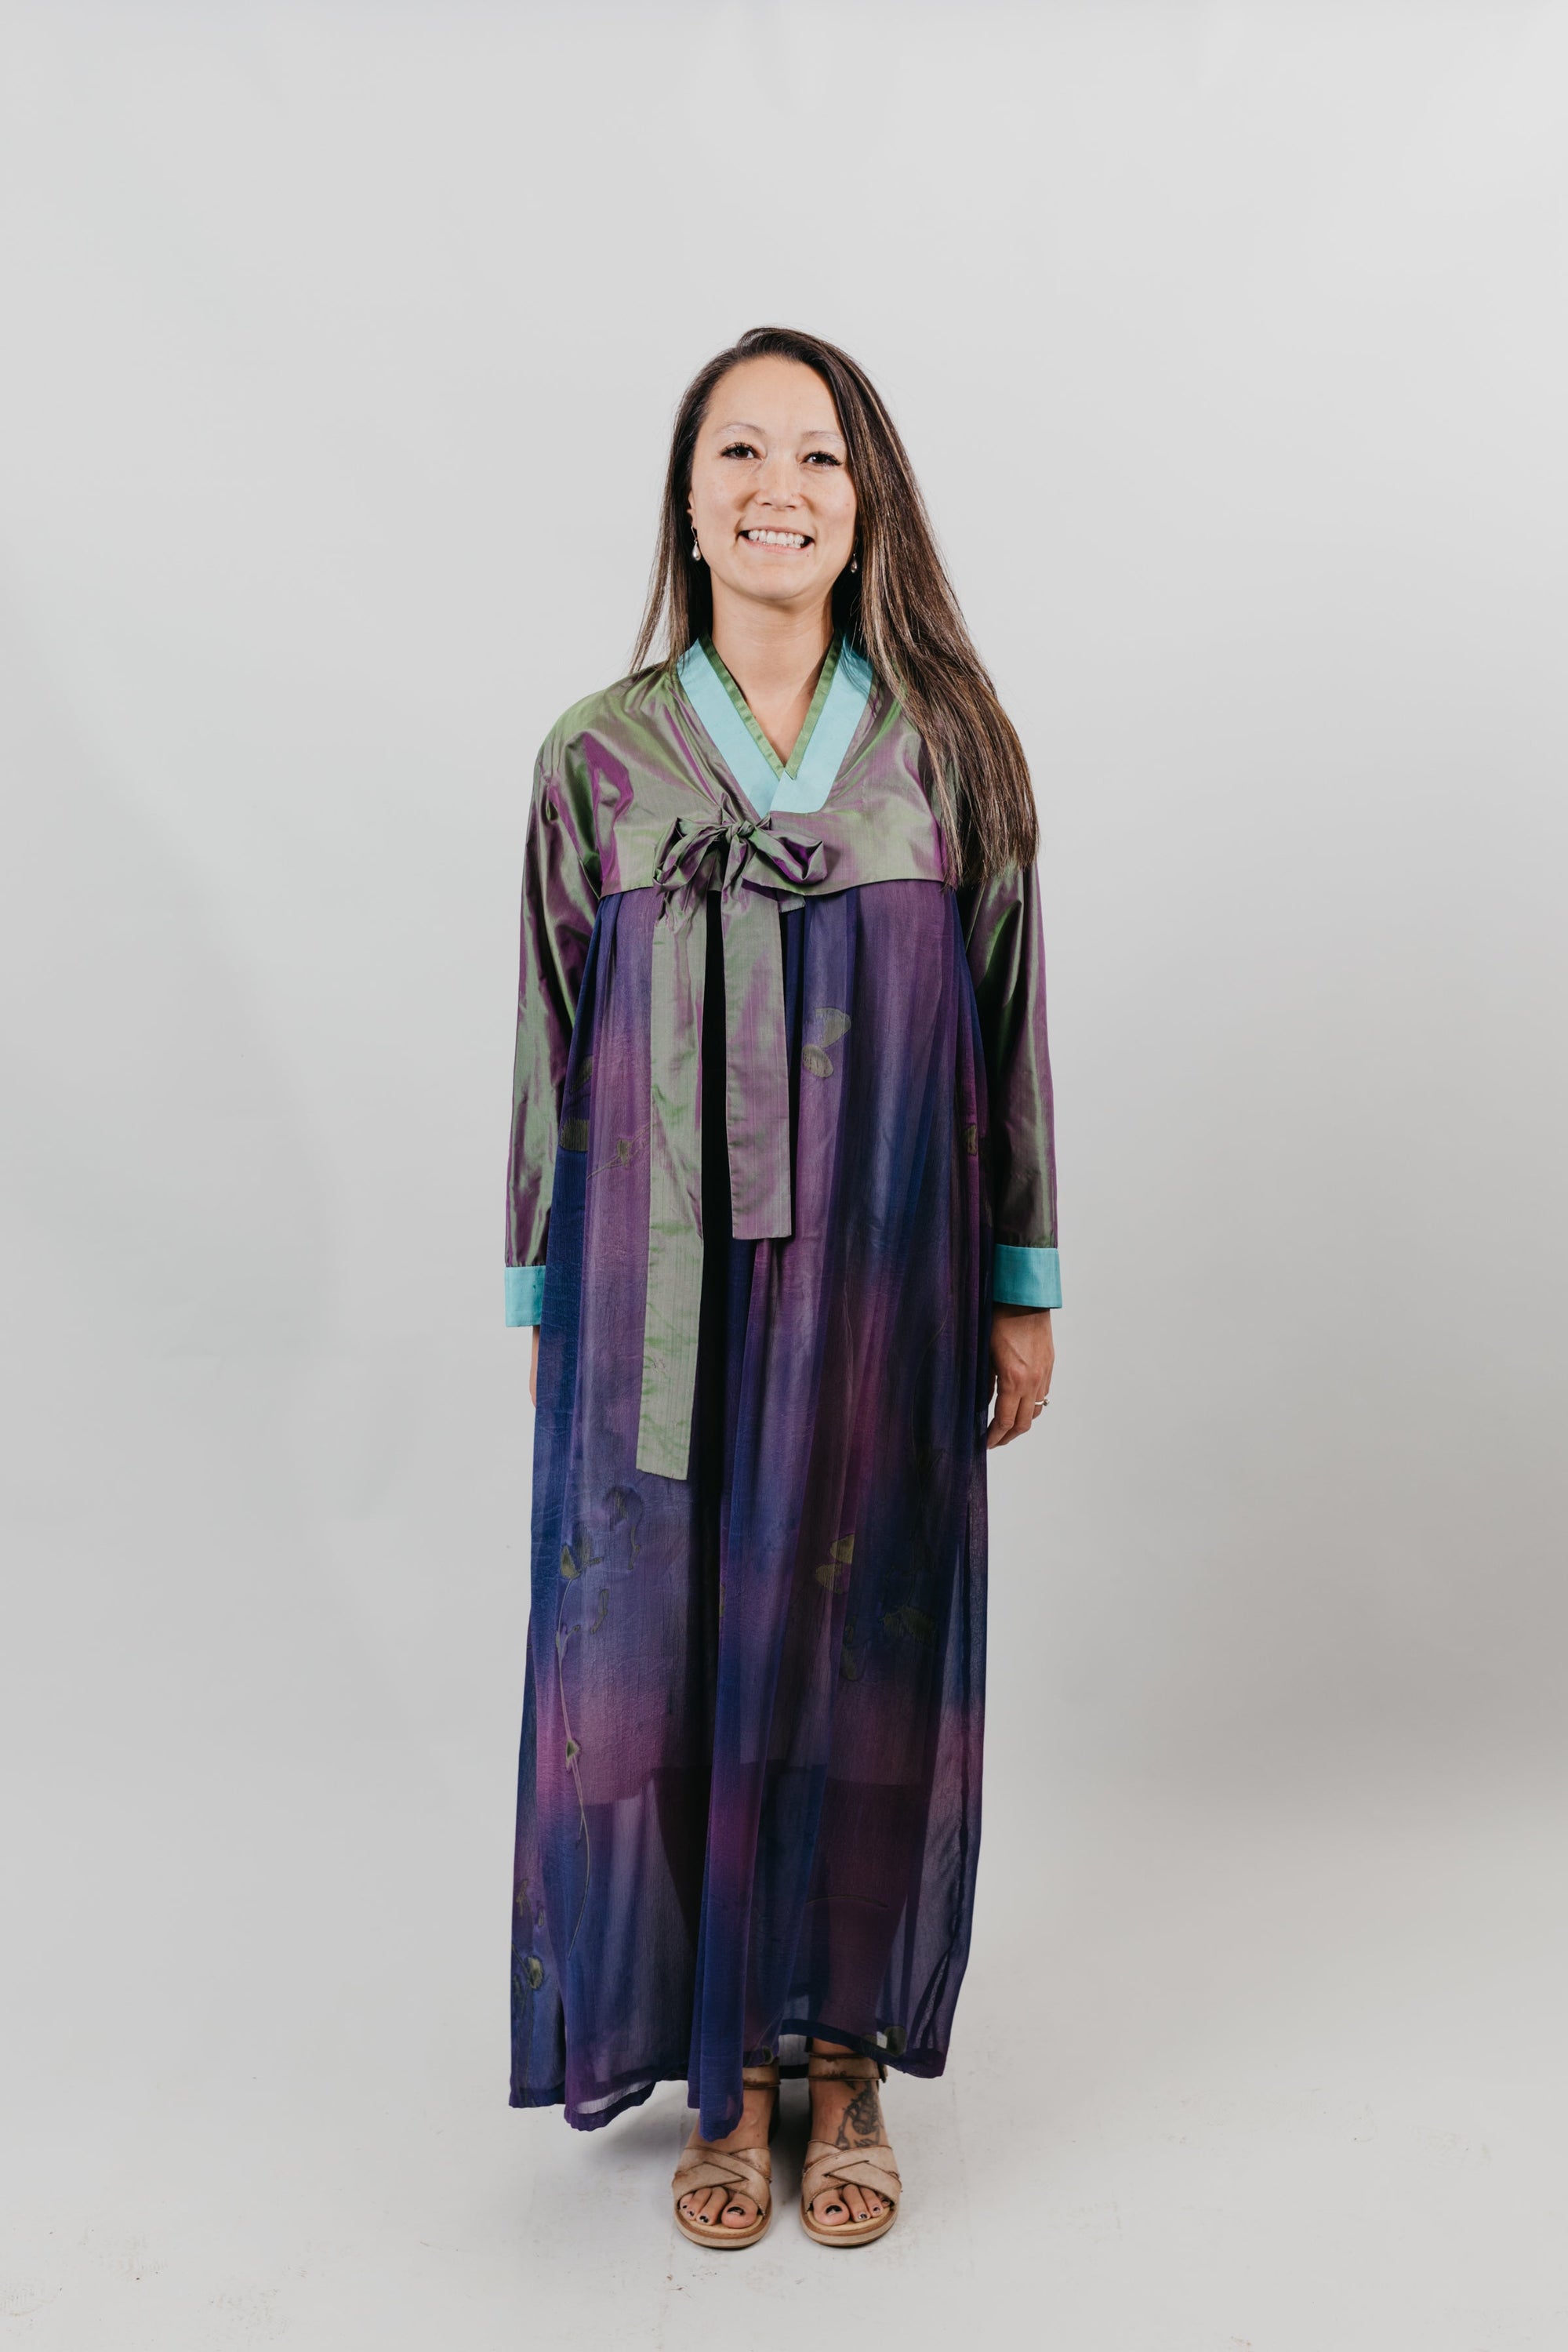 Woman wearing a purple shot silk han bok dress and jacket. Jacket is of teal and green shot silk and tied in the front. She is standing in front of a white backdrop.